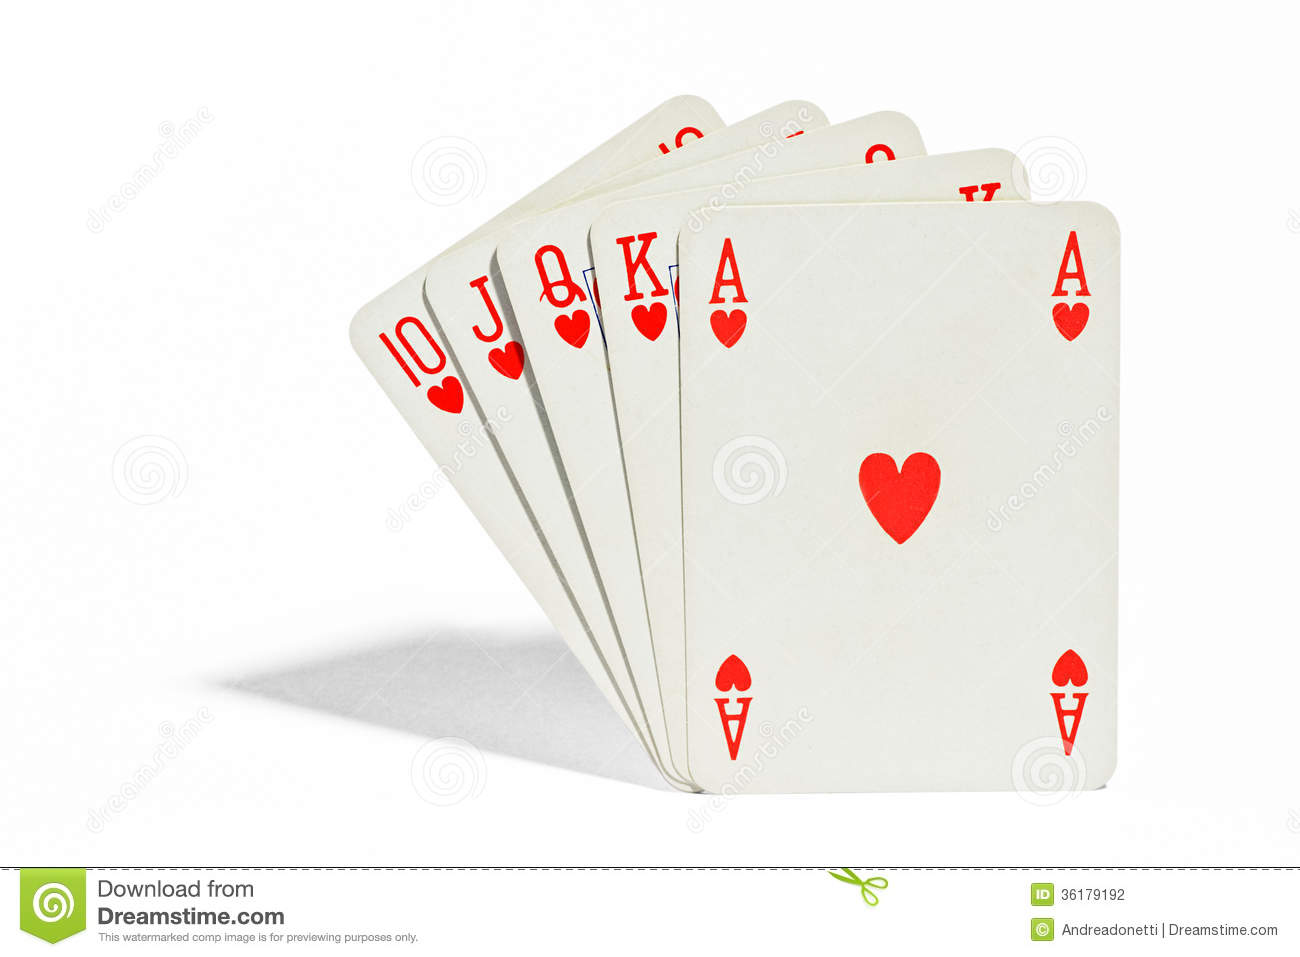 Hand Of Playing Cards In Poker Showing A Royal Flush Or Straight Flush